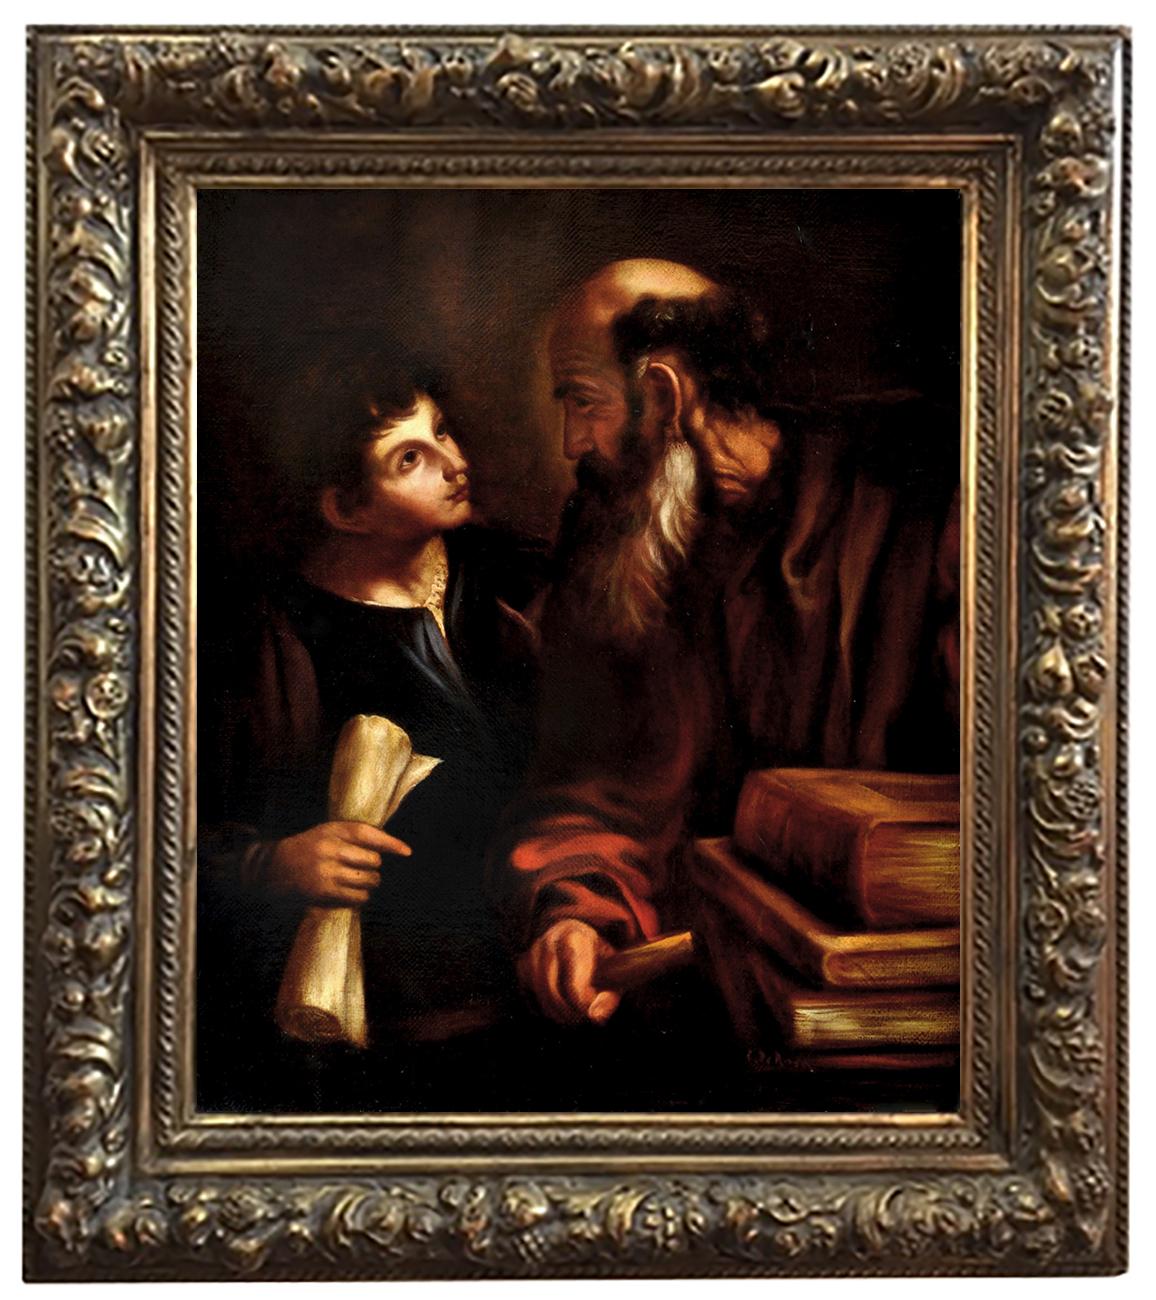 YOUTH AND WISDOM- In the Manner of Caravaggio  Figurative Oil on Canvas Painting